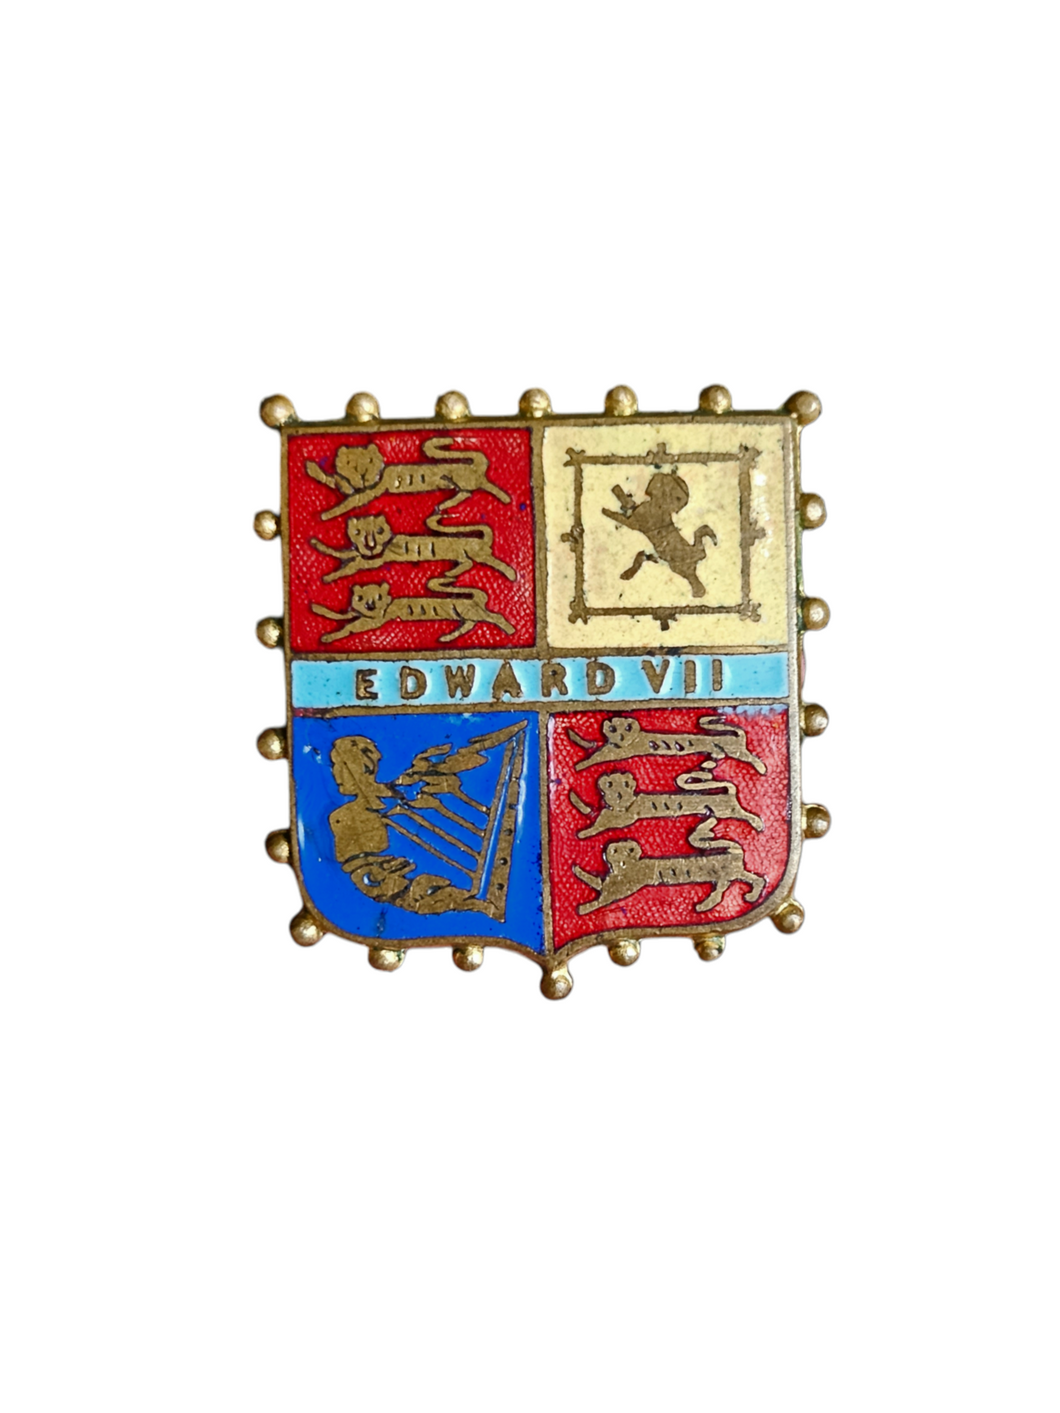 1910s King Edward VII Coat of Arms Brooch